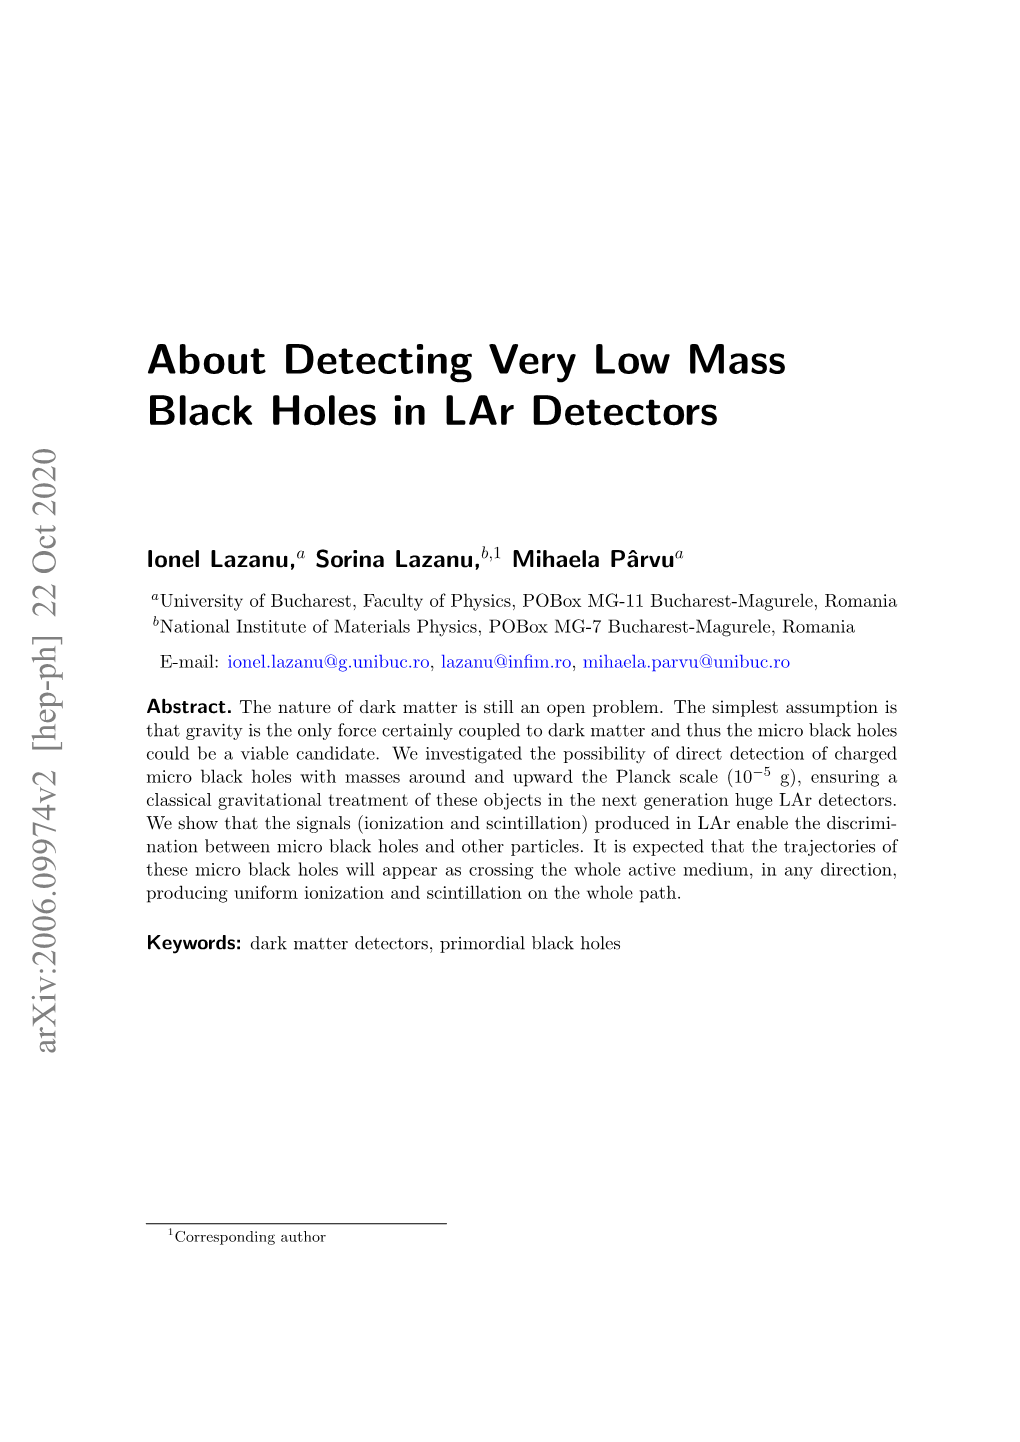 About Detecting Very Low Mass Black Holes in Lar Detectors